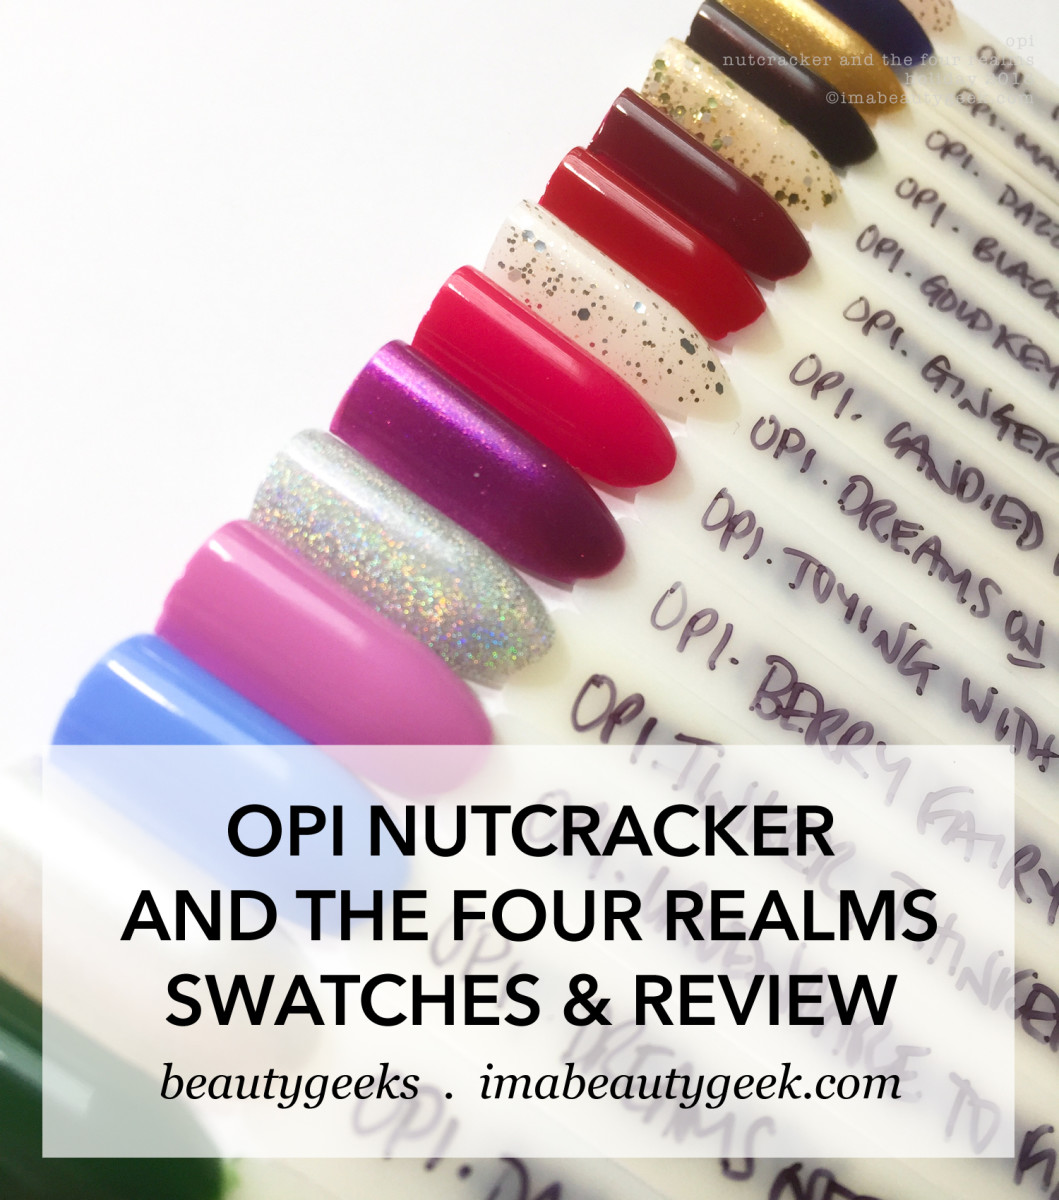 OPI Nutcracker and the Four Realms Swatches Review H1